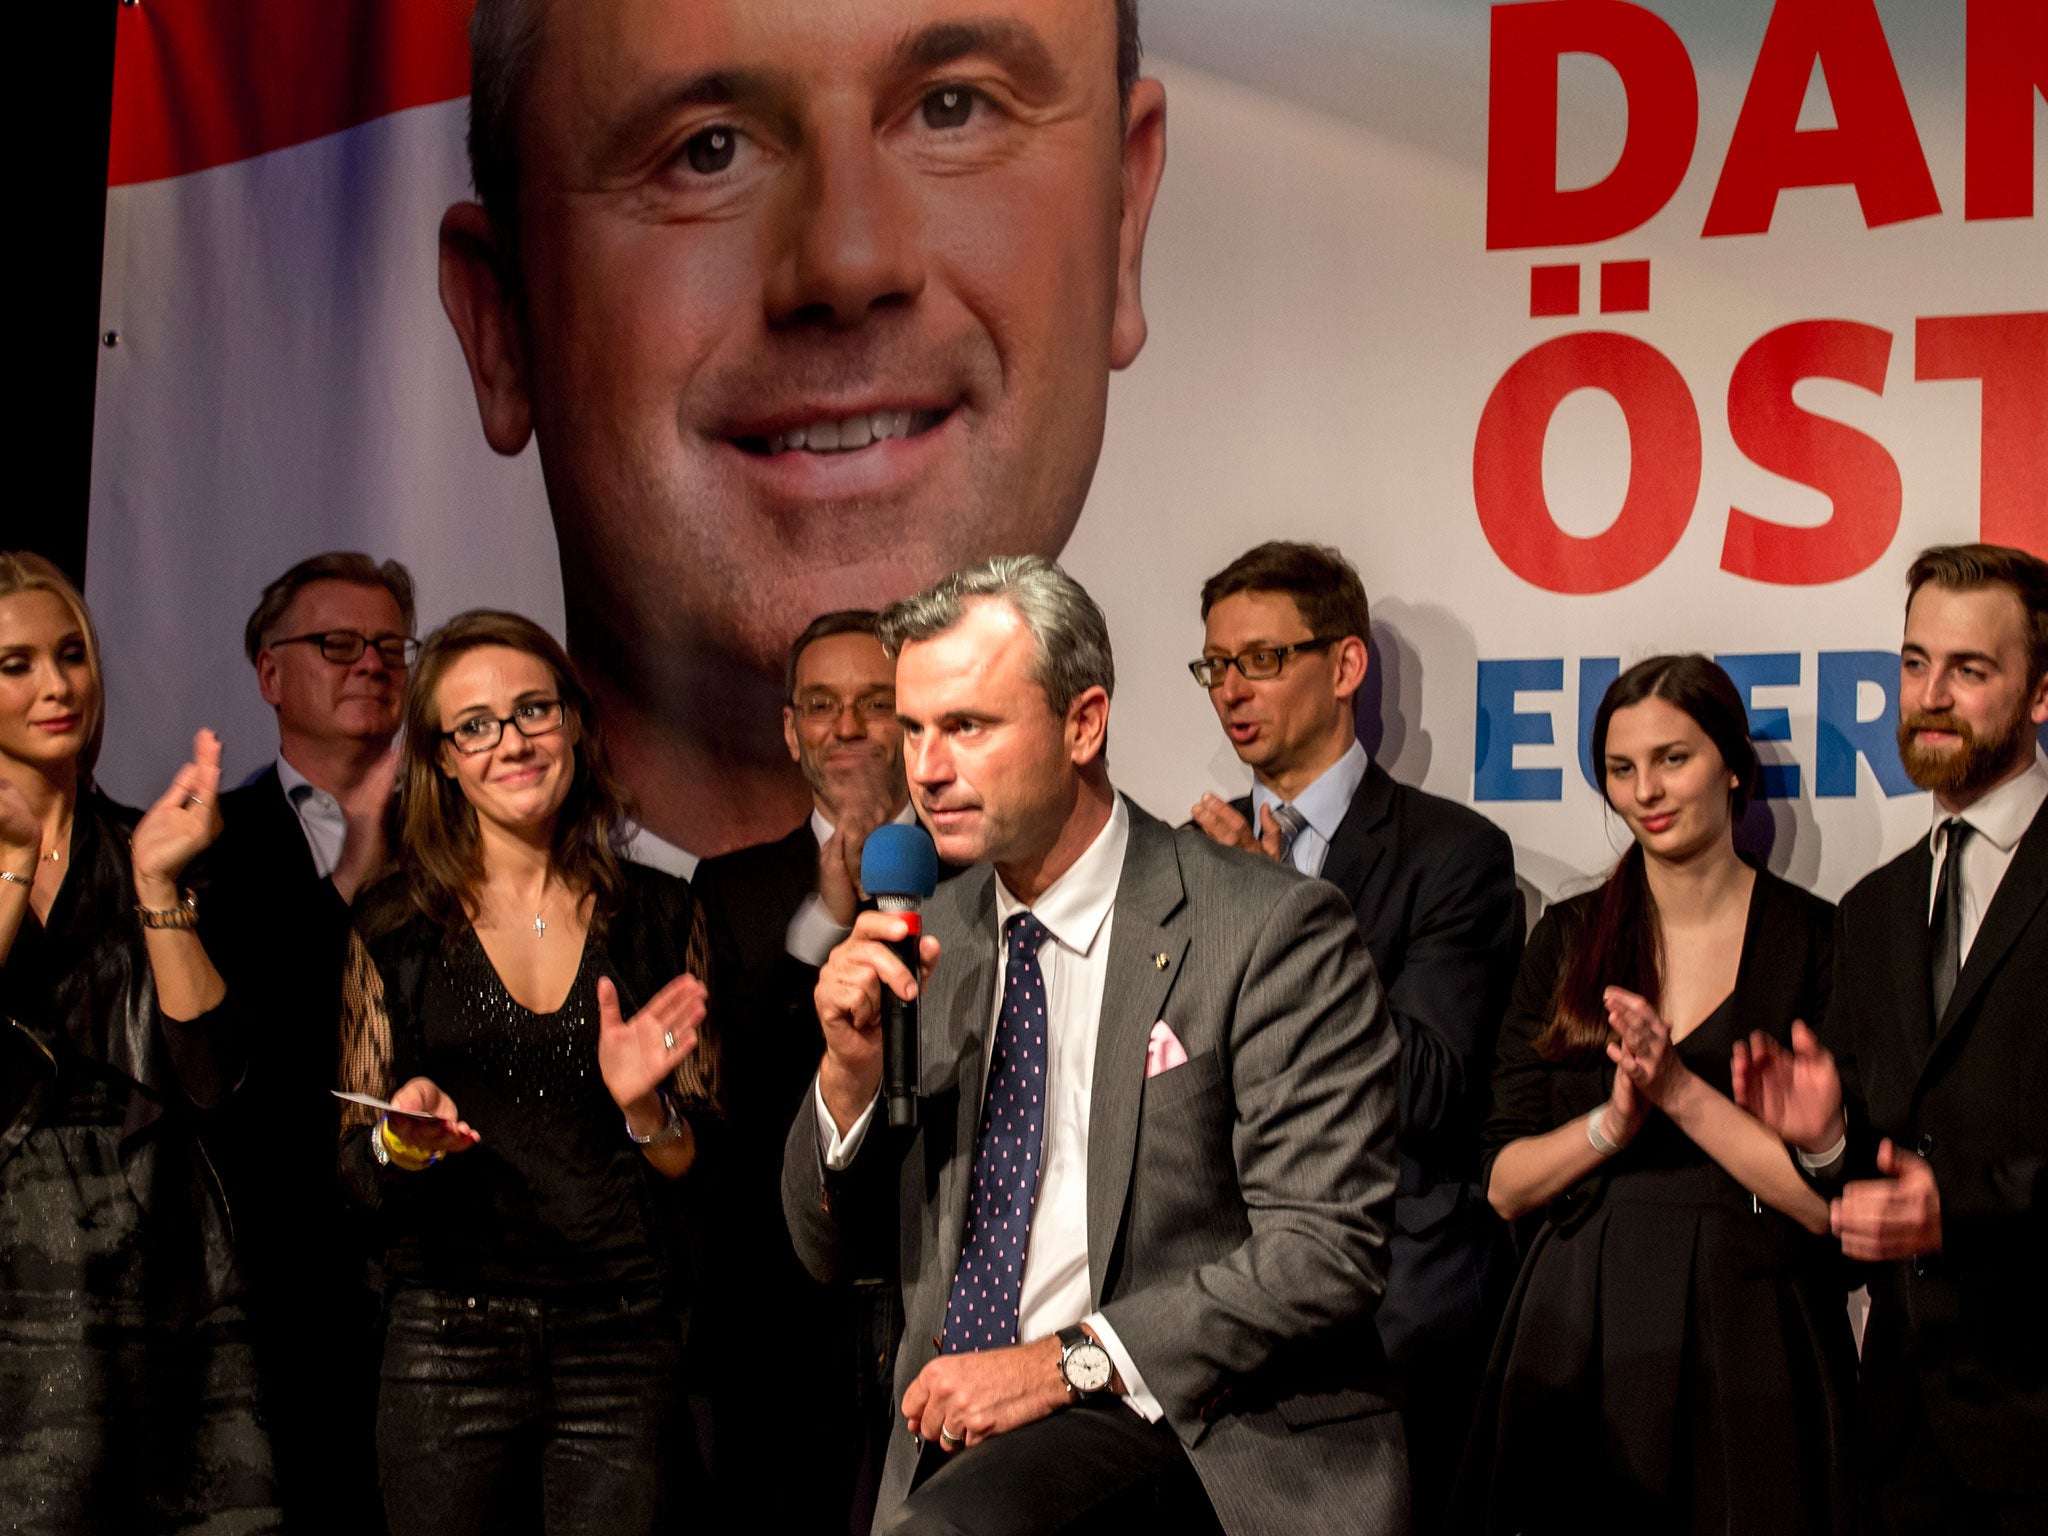 Norbert Hoffer of the far-right Freedom Party narrowly lost in the last Austrian presidential election (Getty)